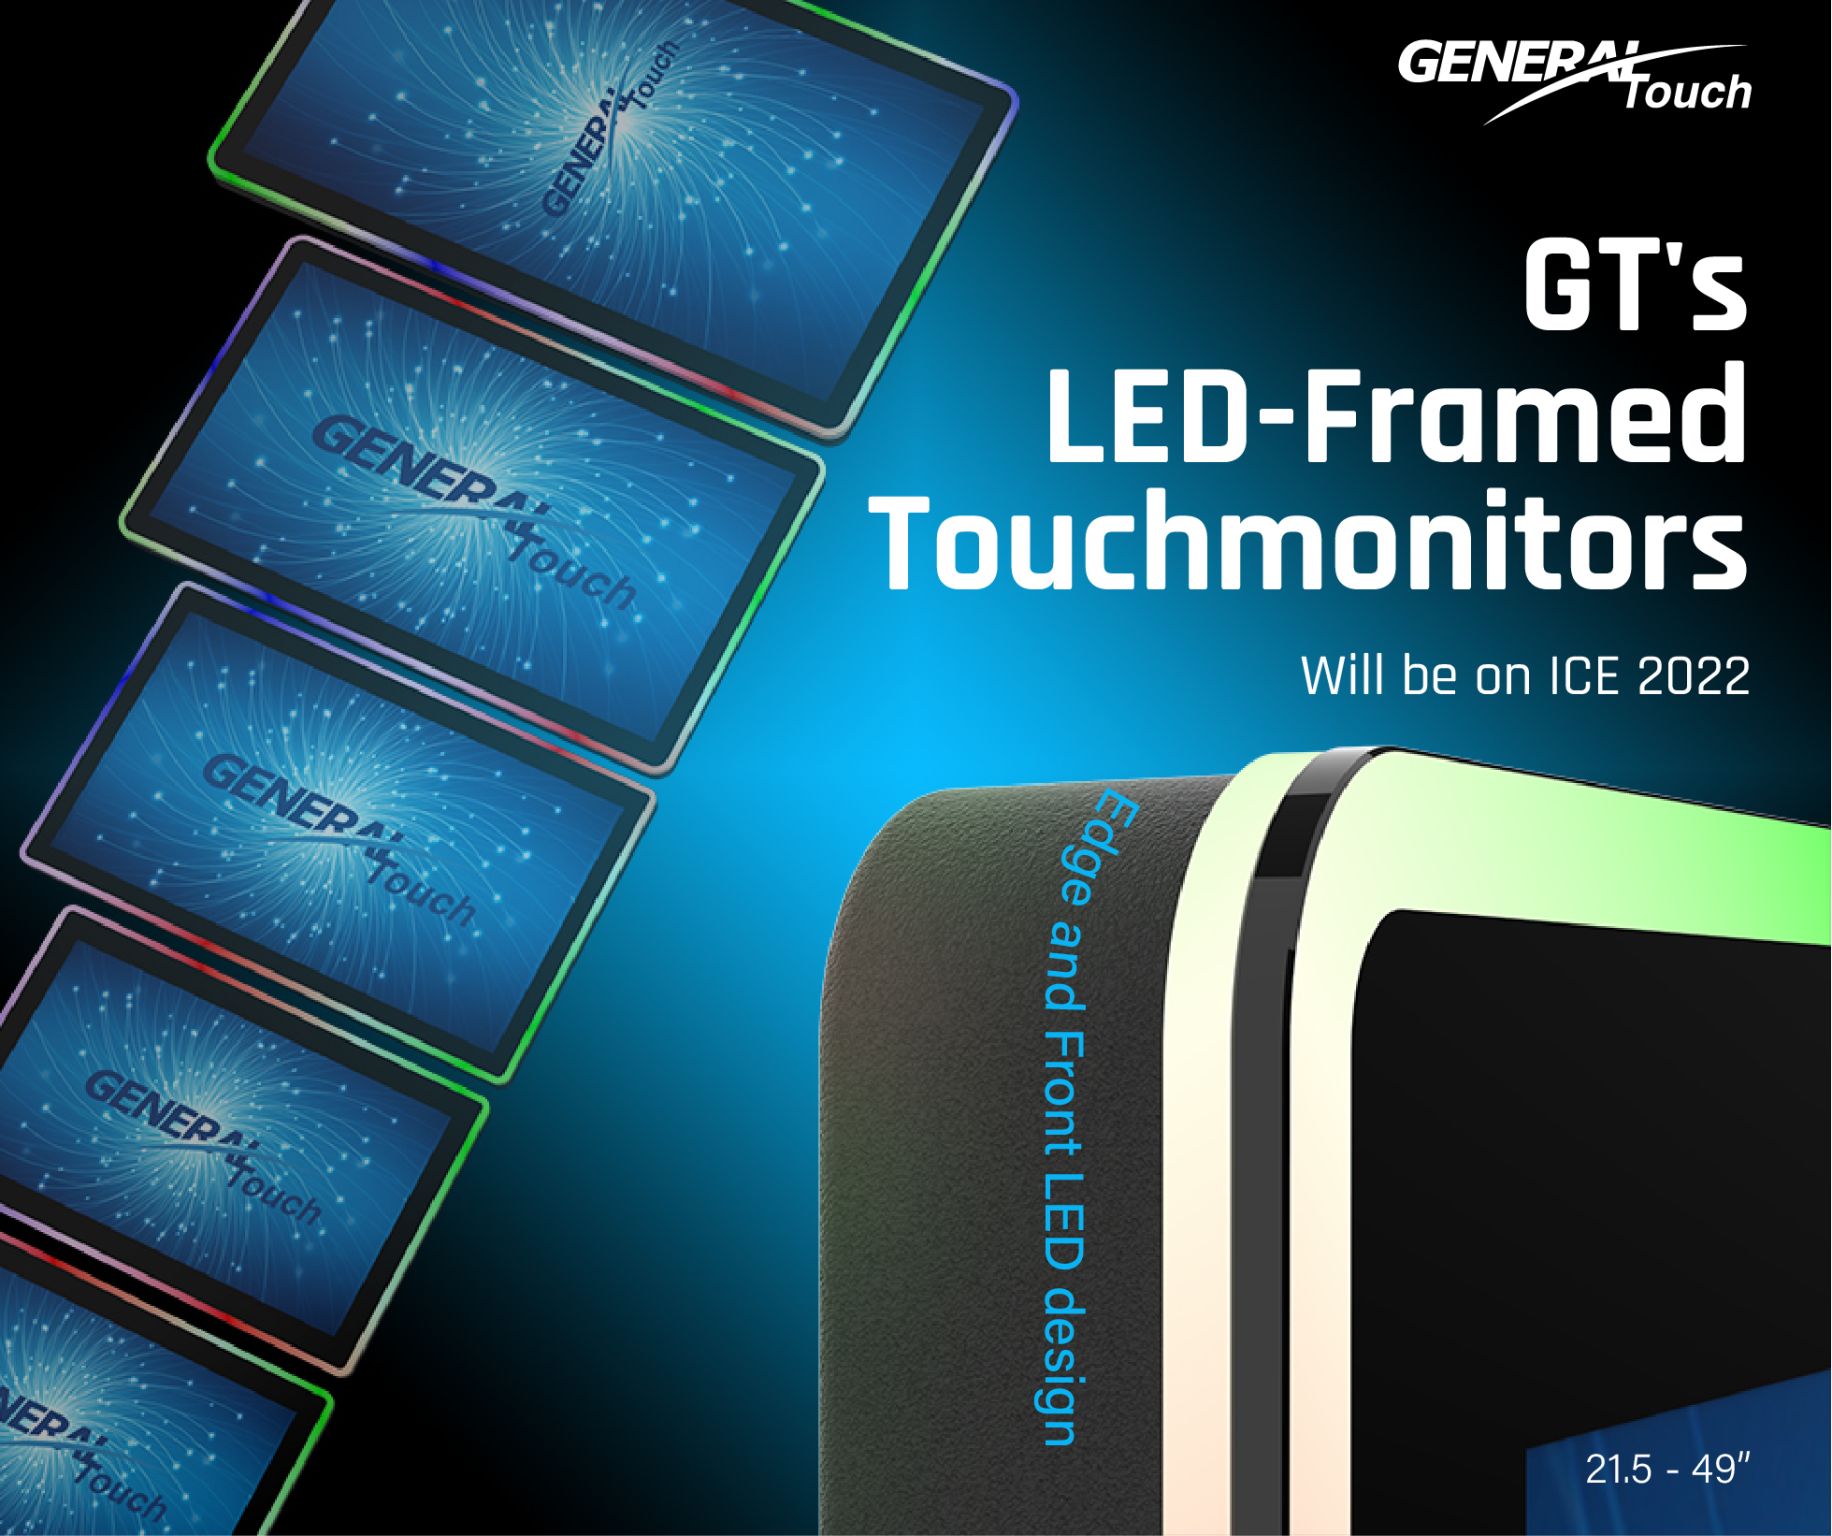 First look at GT’s LED-Framed Touchmonitors – will be on ICE 2022